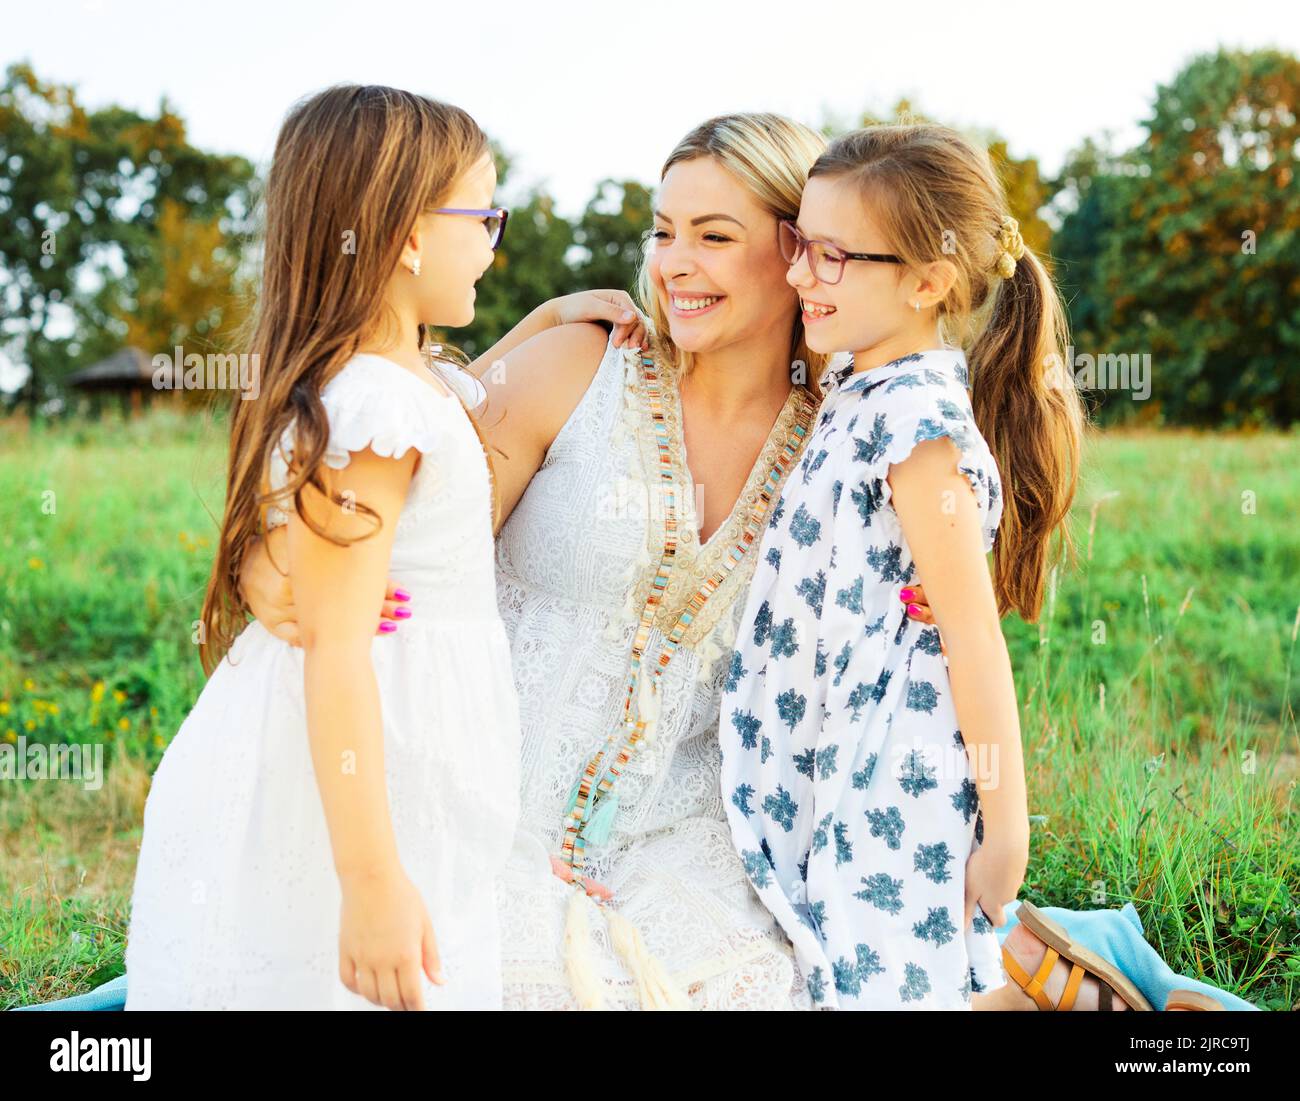 child family portrait outdoor mother woman girl happy happiness lifestyle having fun bonding sister Stock Photo